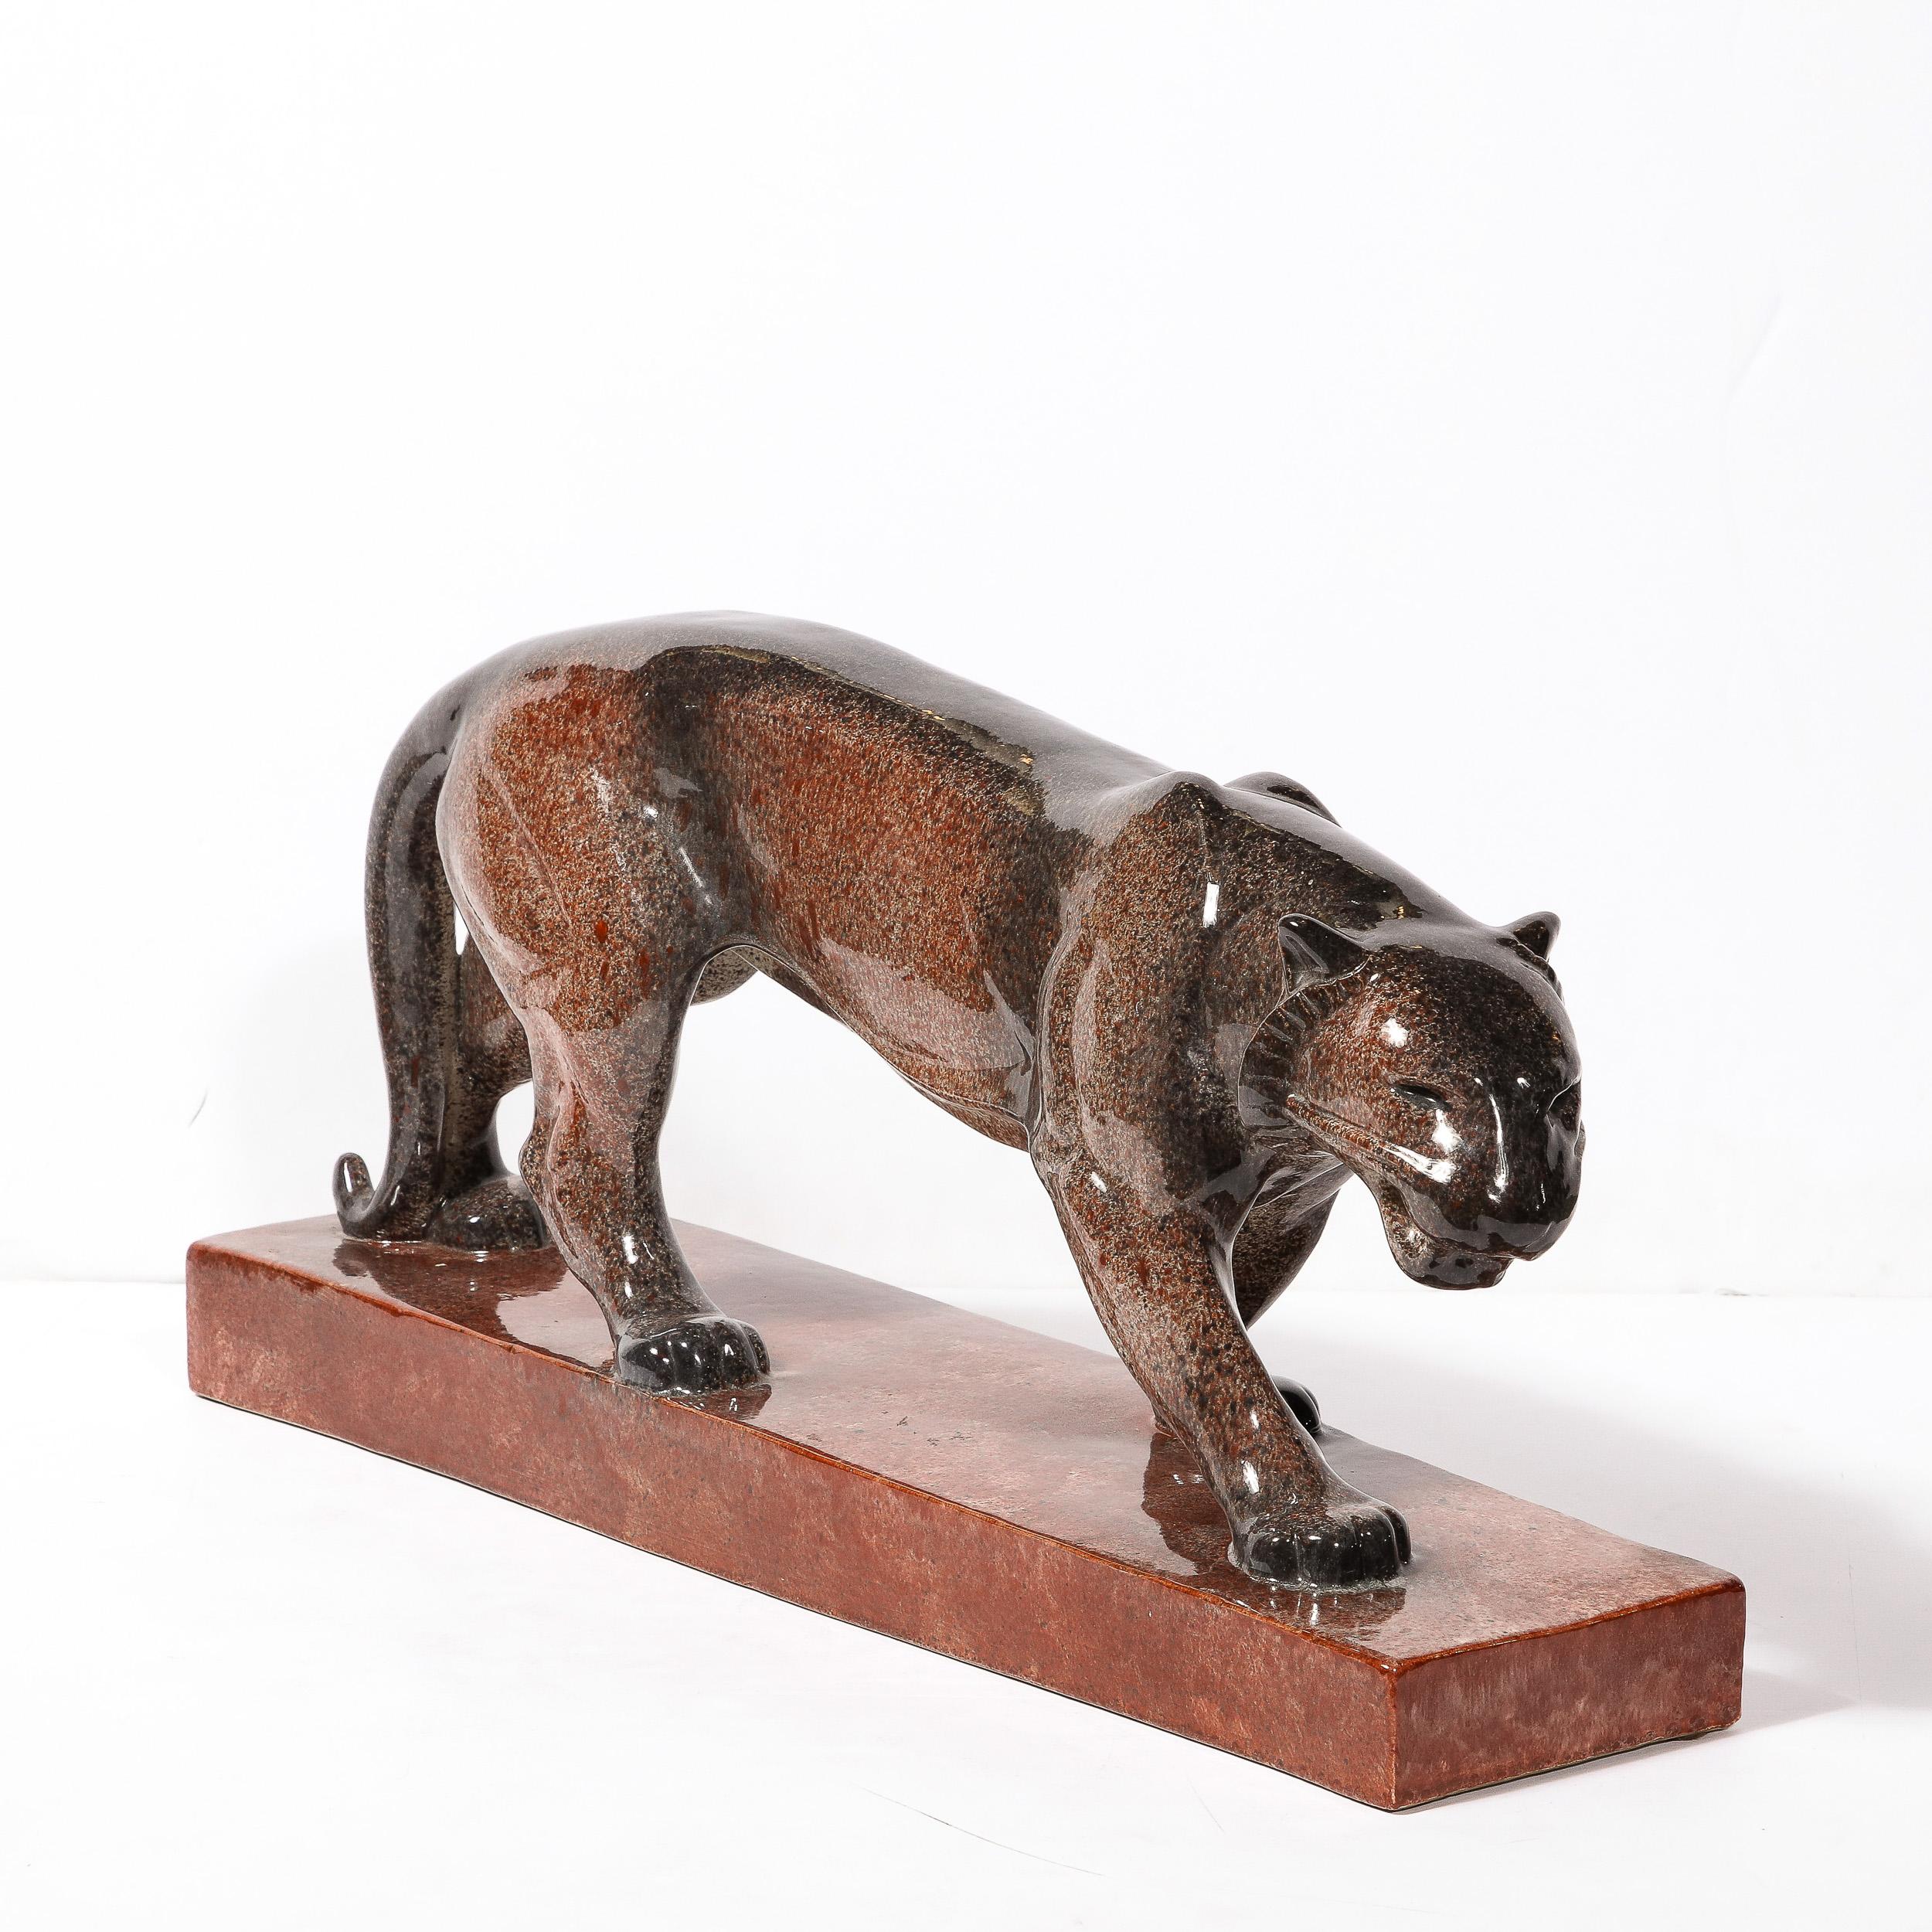 This gleaming Art Deco Ceramic Panther sculpture signed Vago Weiss Originates from France, Circa 1925. Rendered in an optical mixture of stippled charcoal and cool crimson ceramic glazes, the colors relate and blend with stunning gradients across